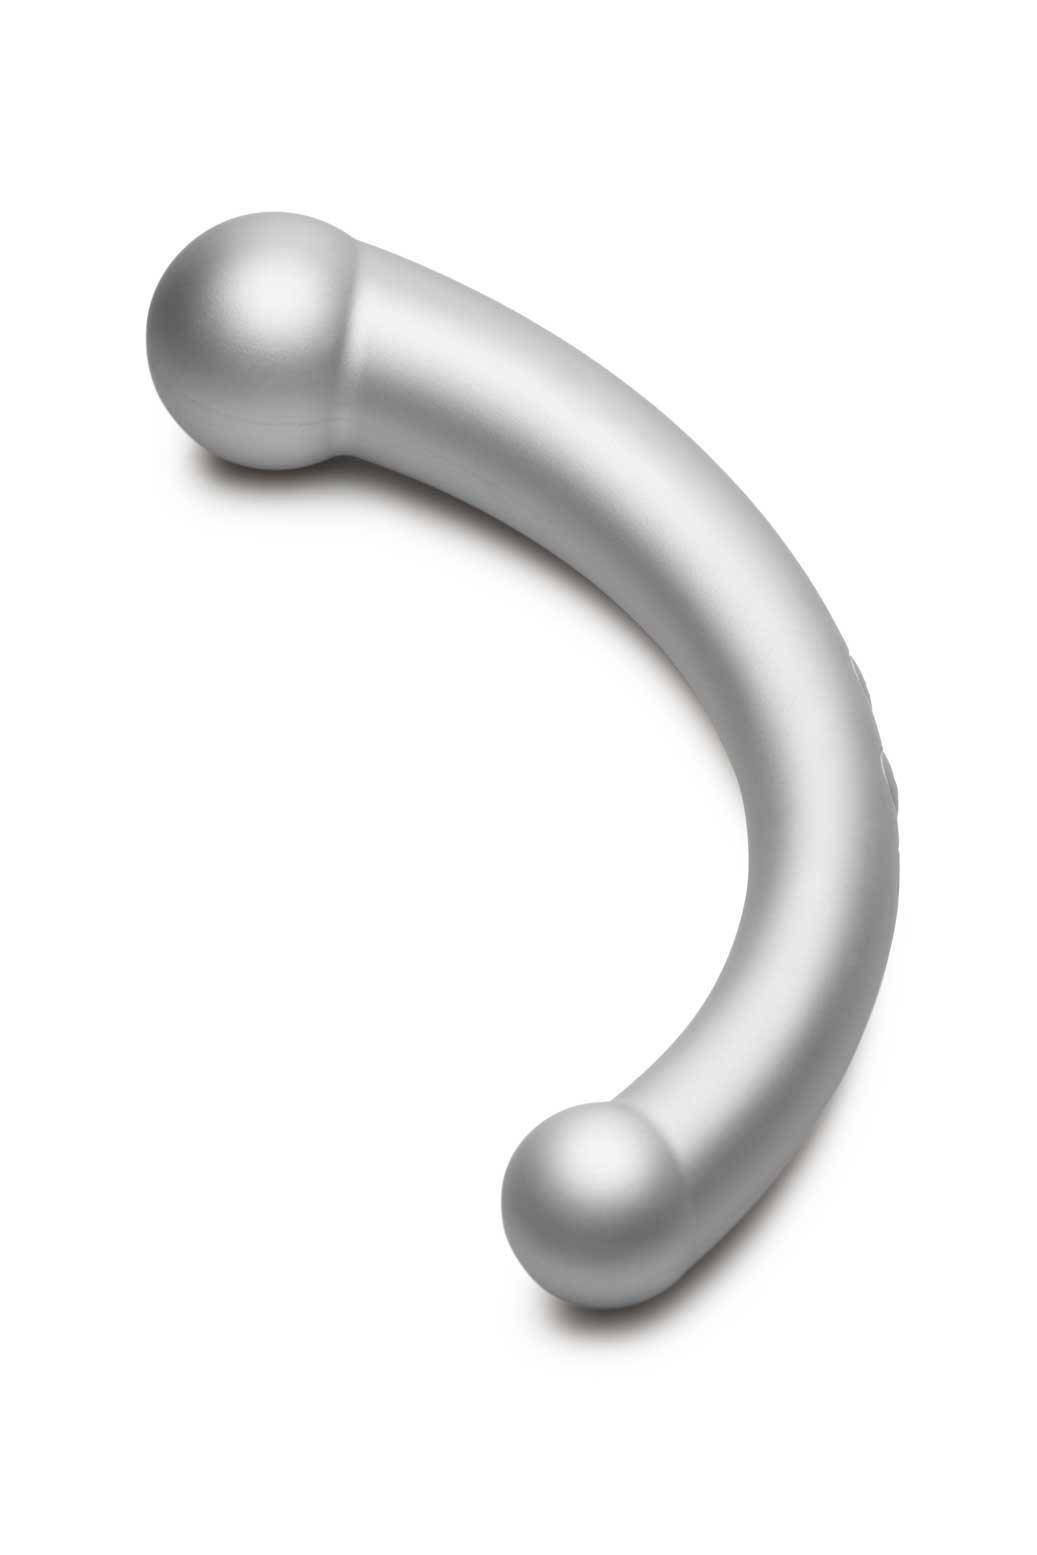 10x Vibra-Crescent Silicone Dual Ended Dildo - Silver - My Sex Toy Hub